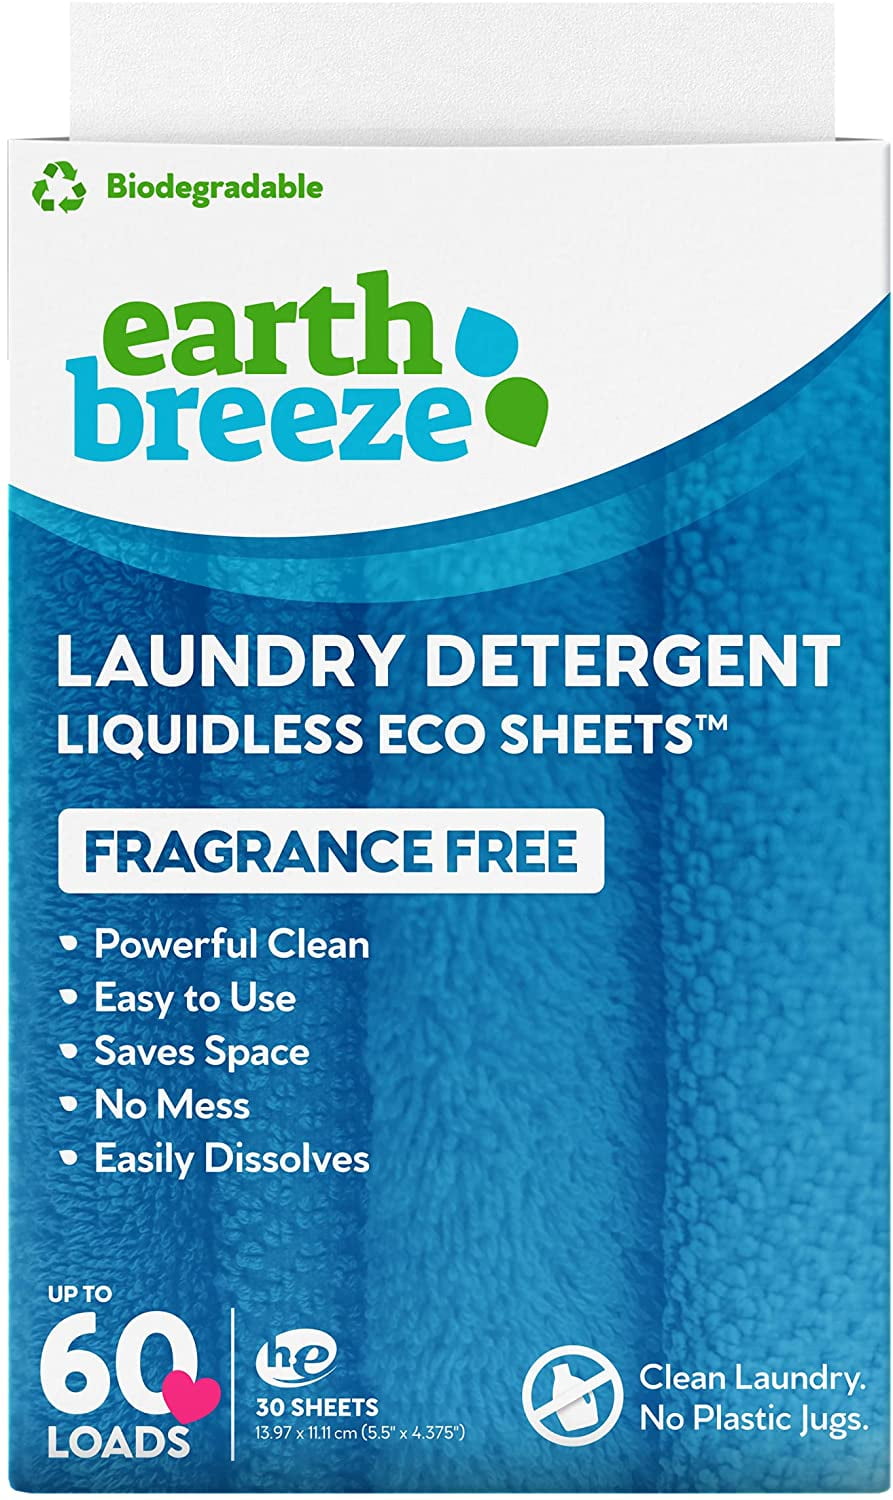 Earth Breeze Laundry Sheets Have Thousands of 5-Star Reviews (Get the Best  Price + FREE Shipping!)